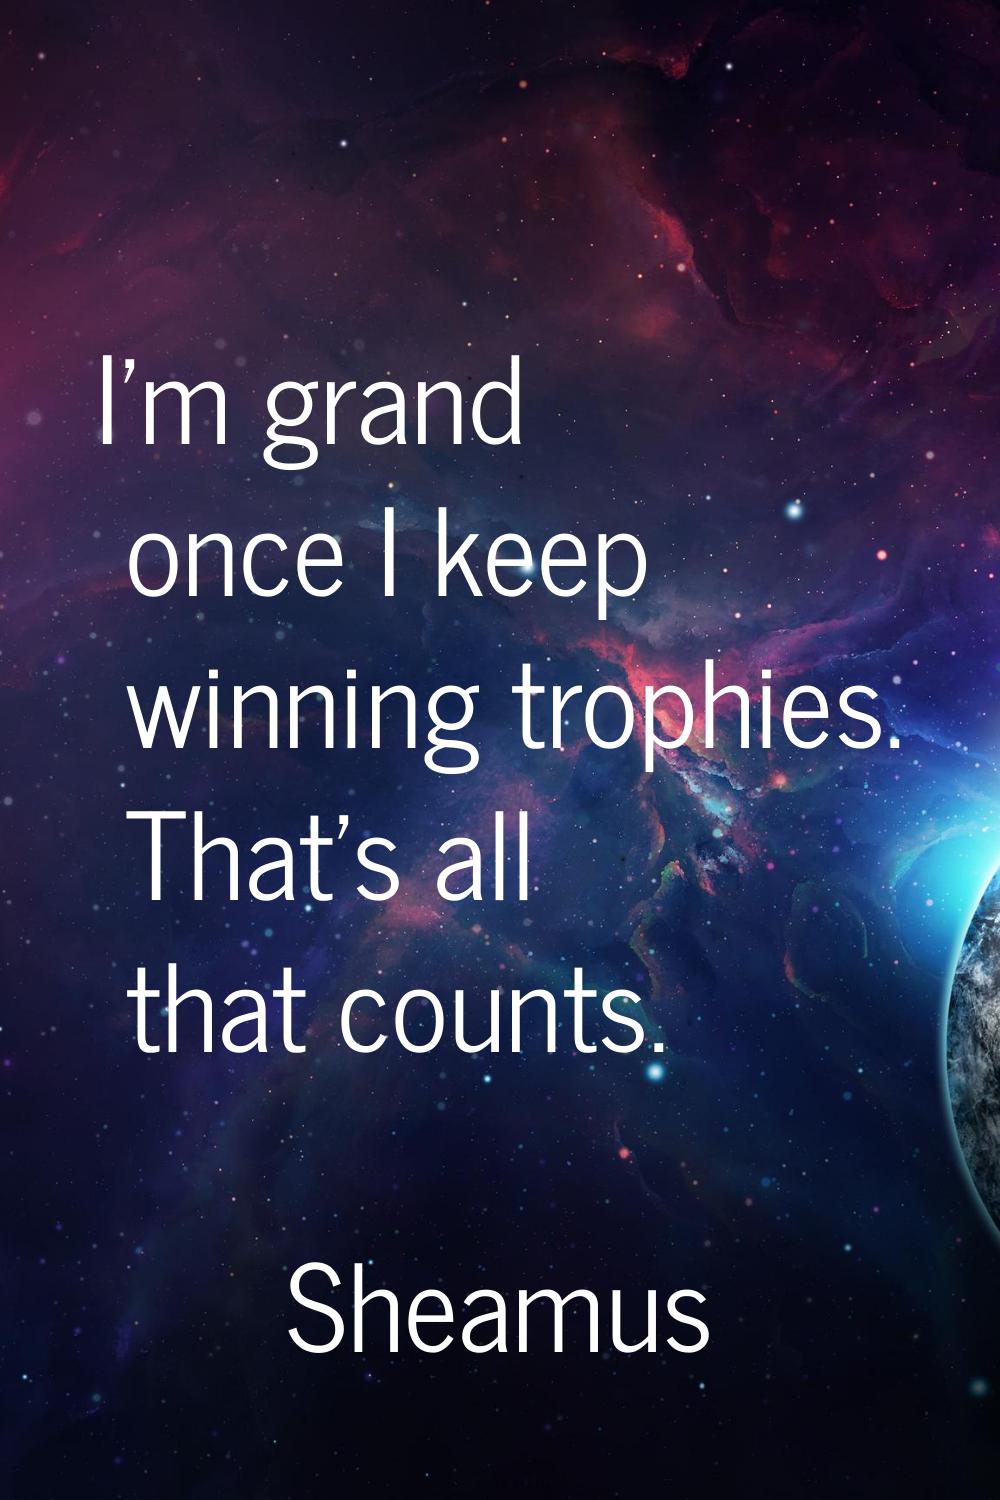 I'm grand once I keep winning trophies. That's all that counts.